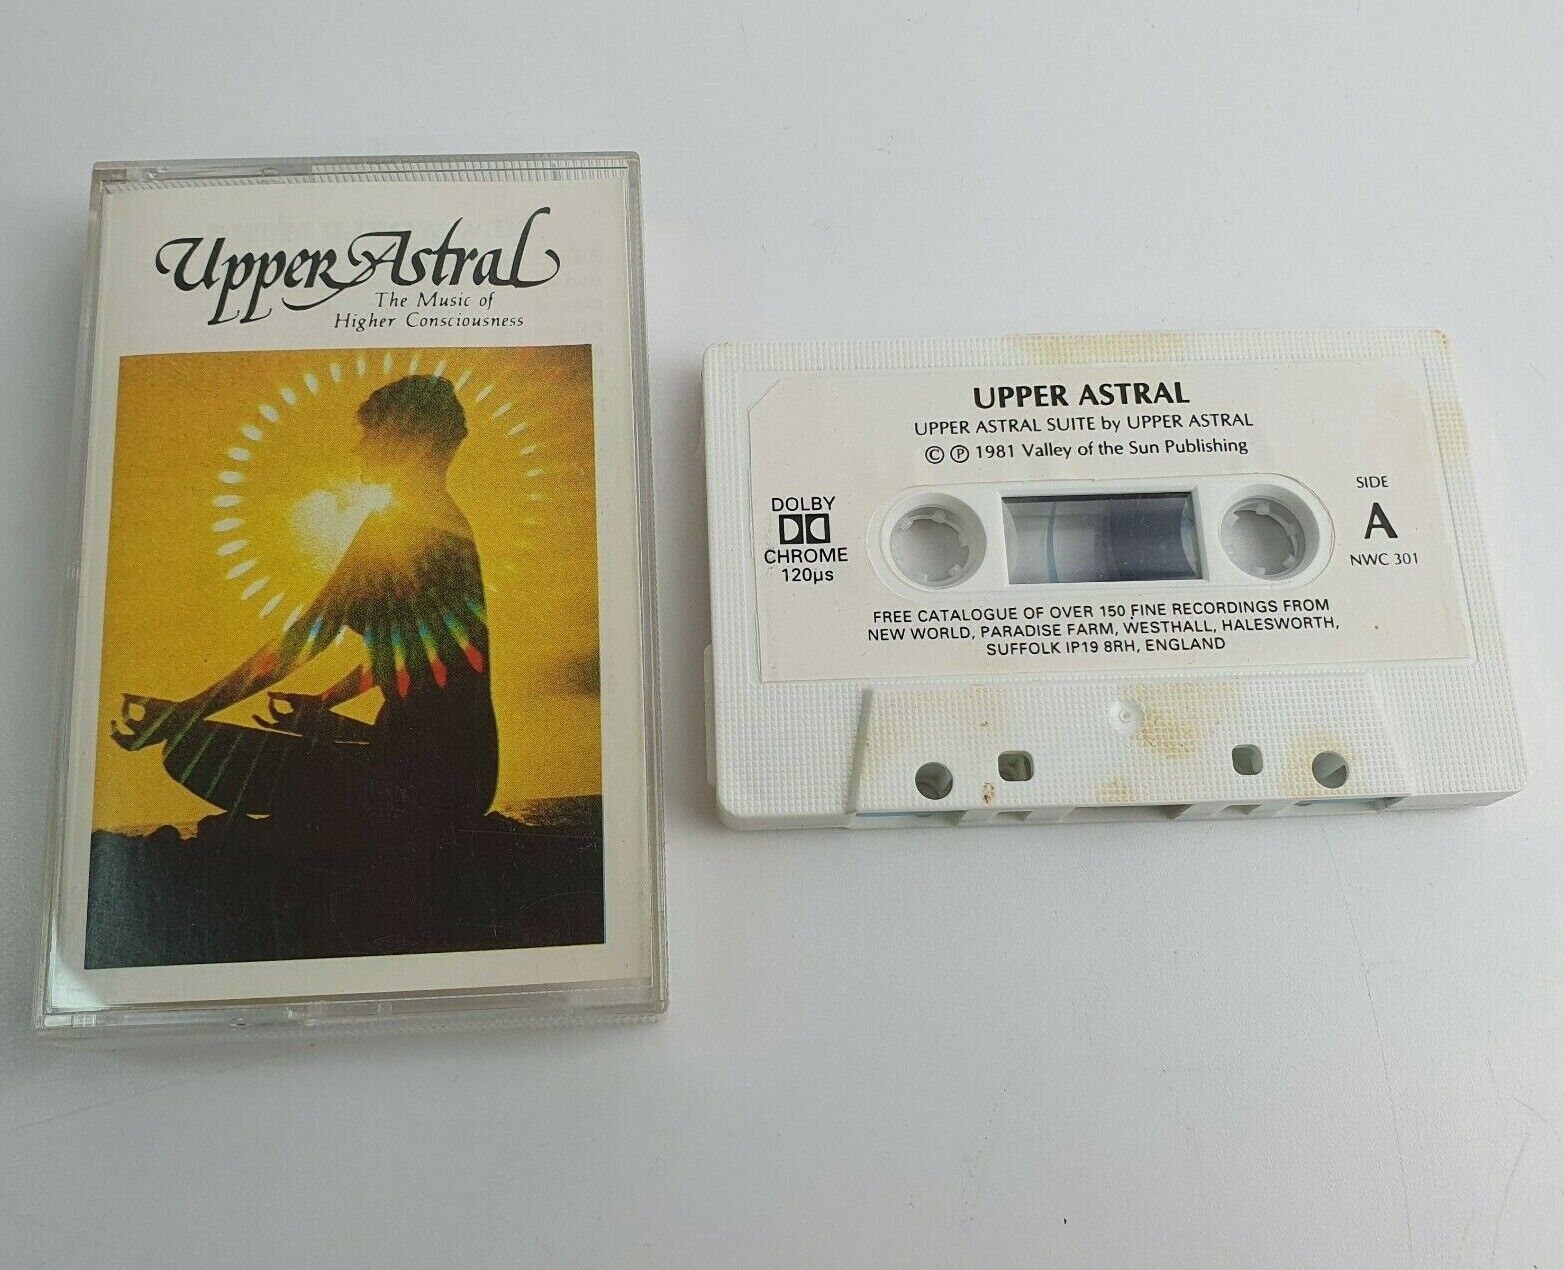 Upper Astral - Music of Higher Consciousness - Cassette Tape - New Age Spiritual Nieuws, VERKOOP